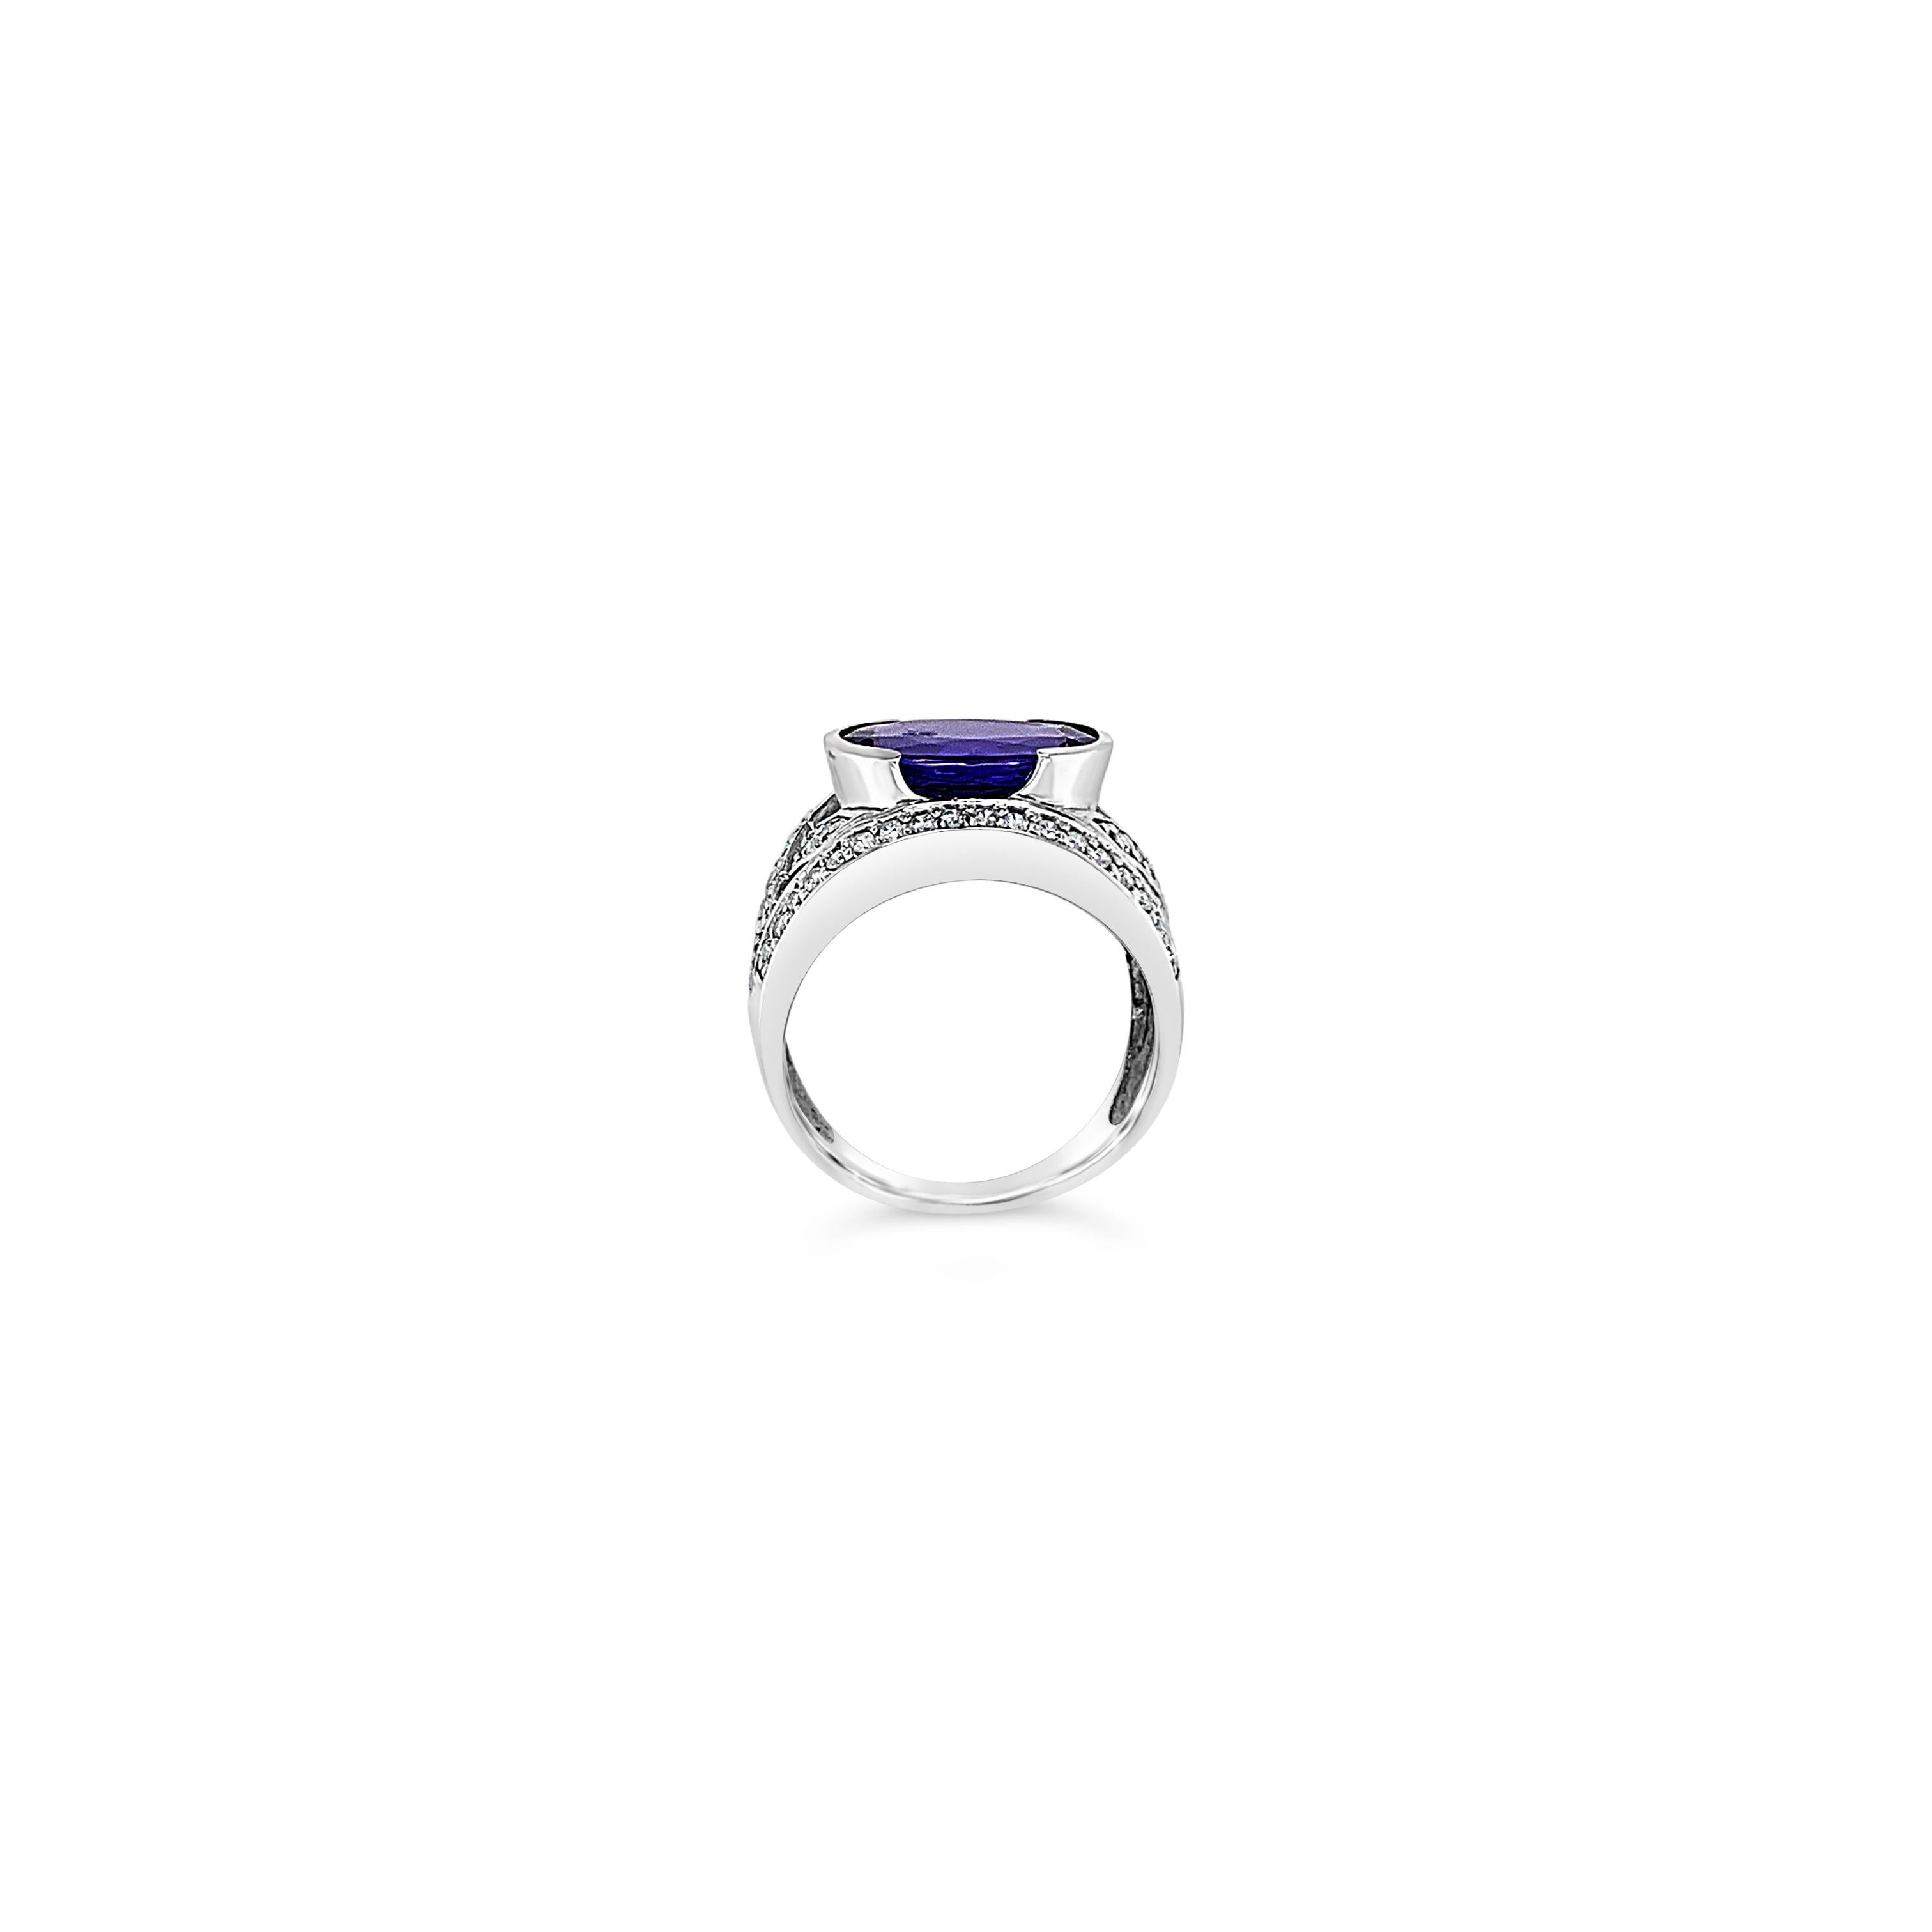 Le Vian® Ring featuring 6 1/2 cts. Blueberry Tanzanite®, set in 14K Vanilla Gold®

Ring Size: 8

Ring may or may not be sizable, please feel free to reach out with any questions!

Item comes with a Le Vian® jewelry box as well as a Le Vian® suede